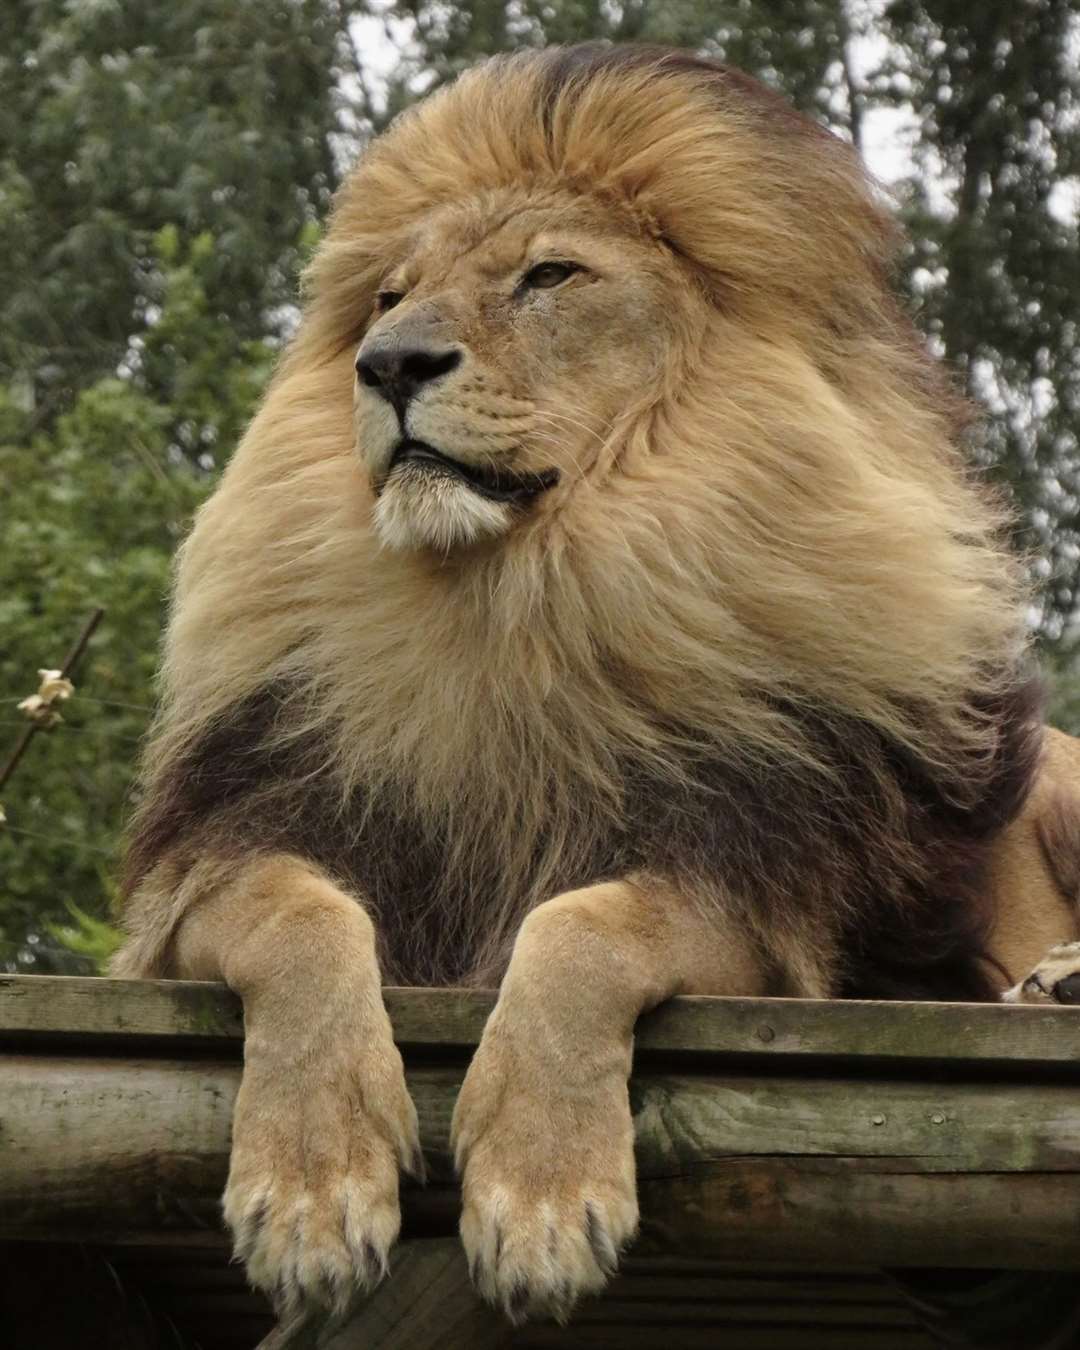 He had the largest and most luxurious mane of any lion at the sanctuary